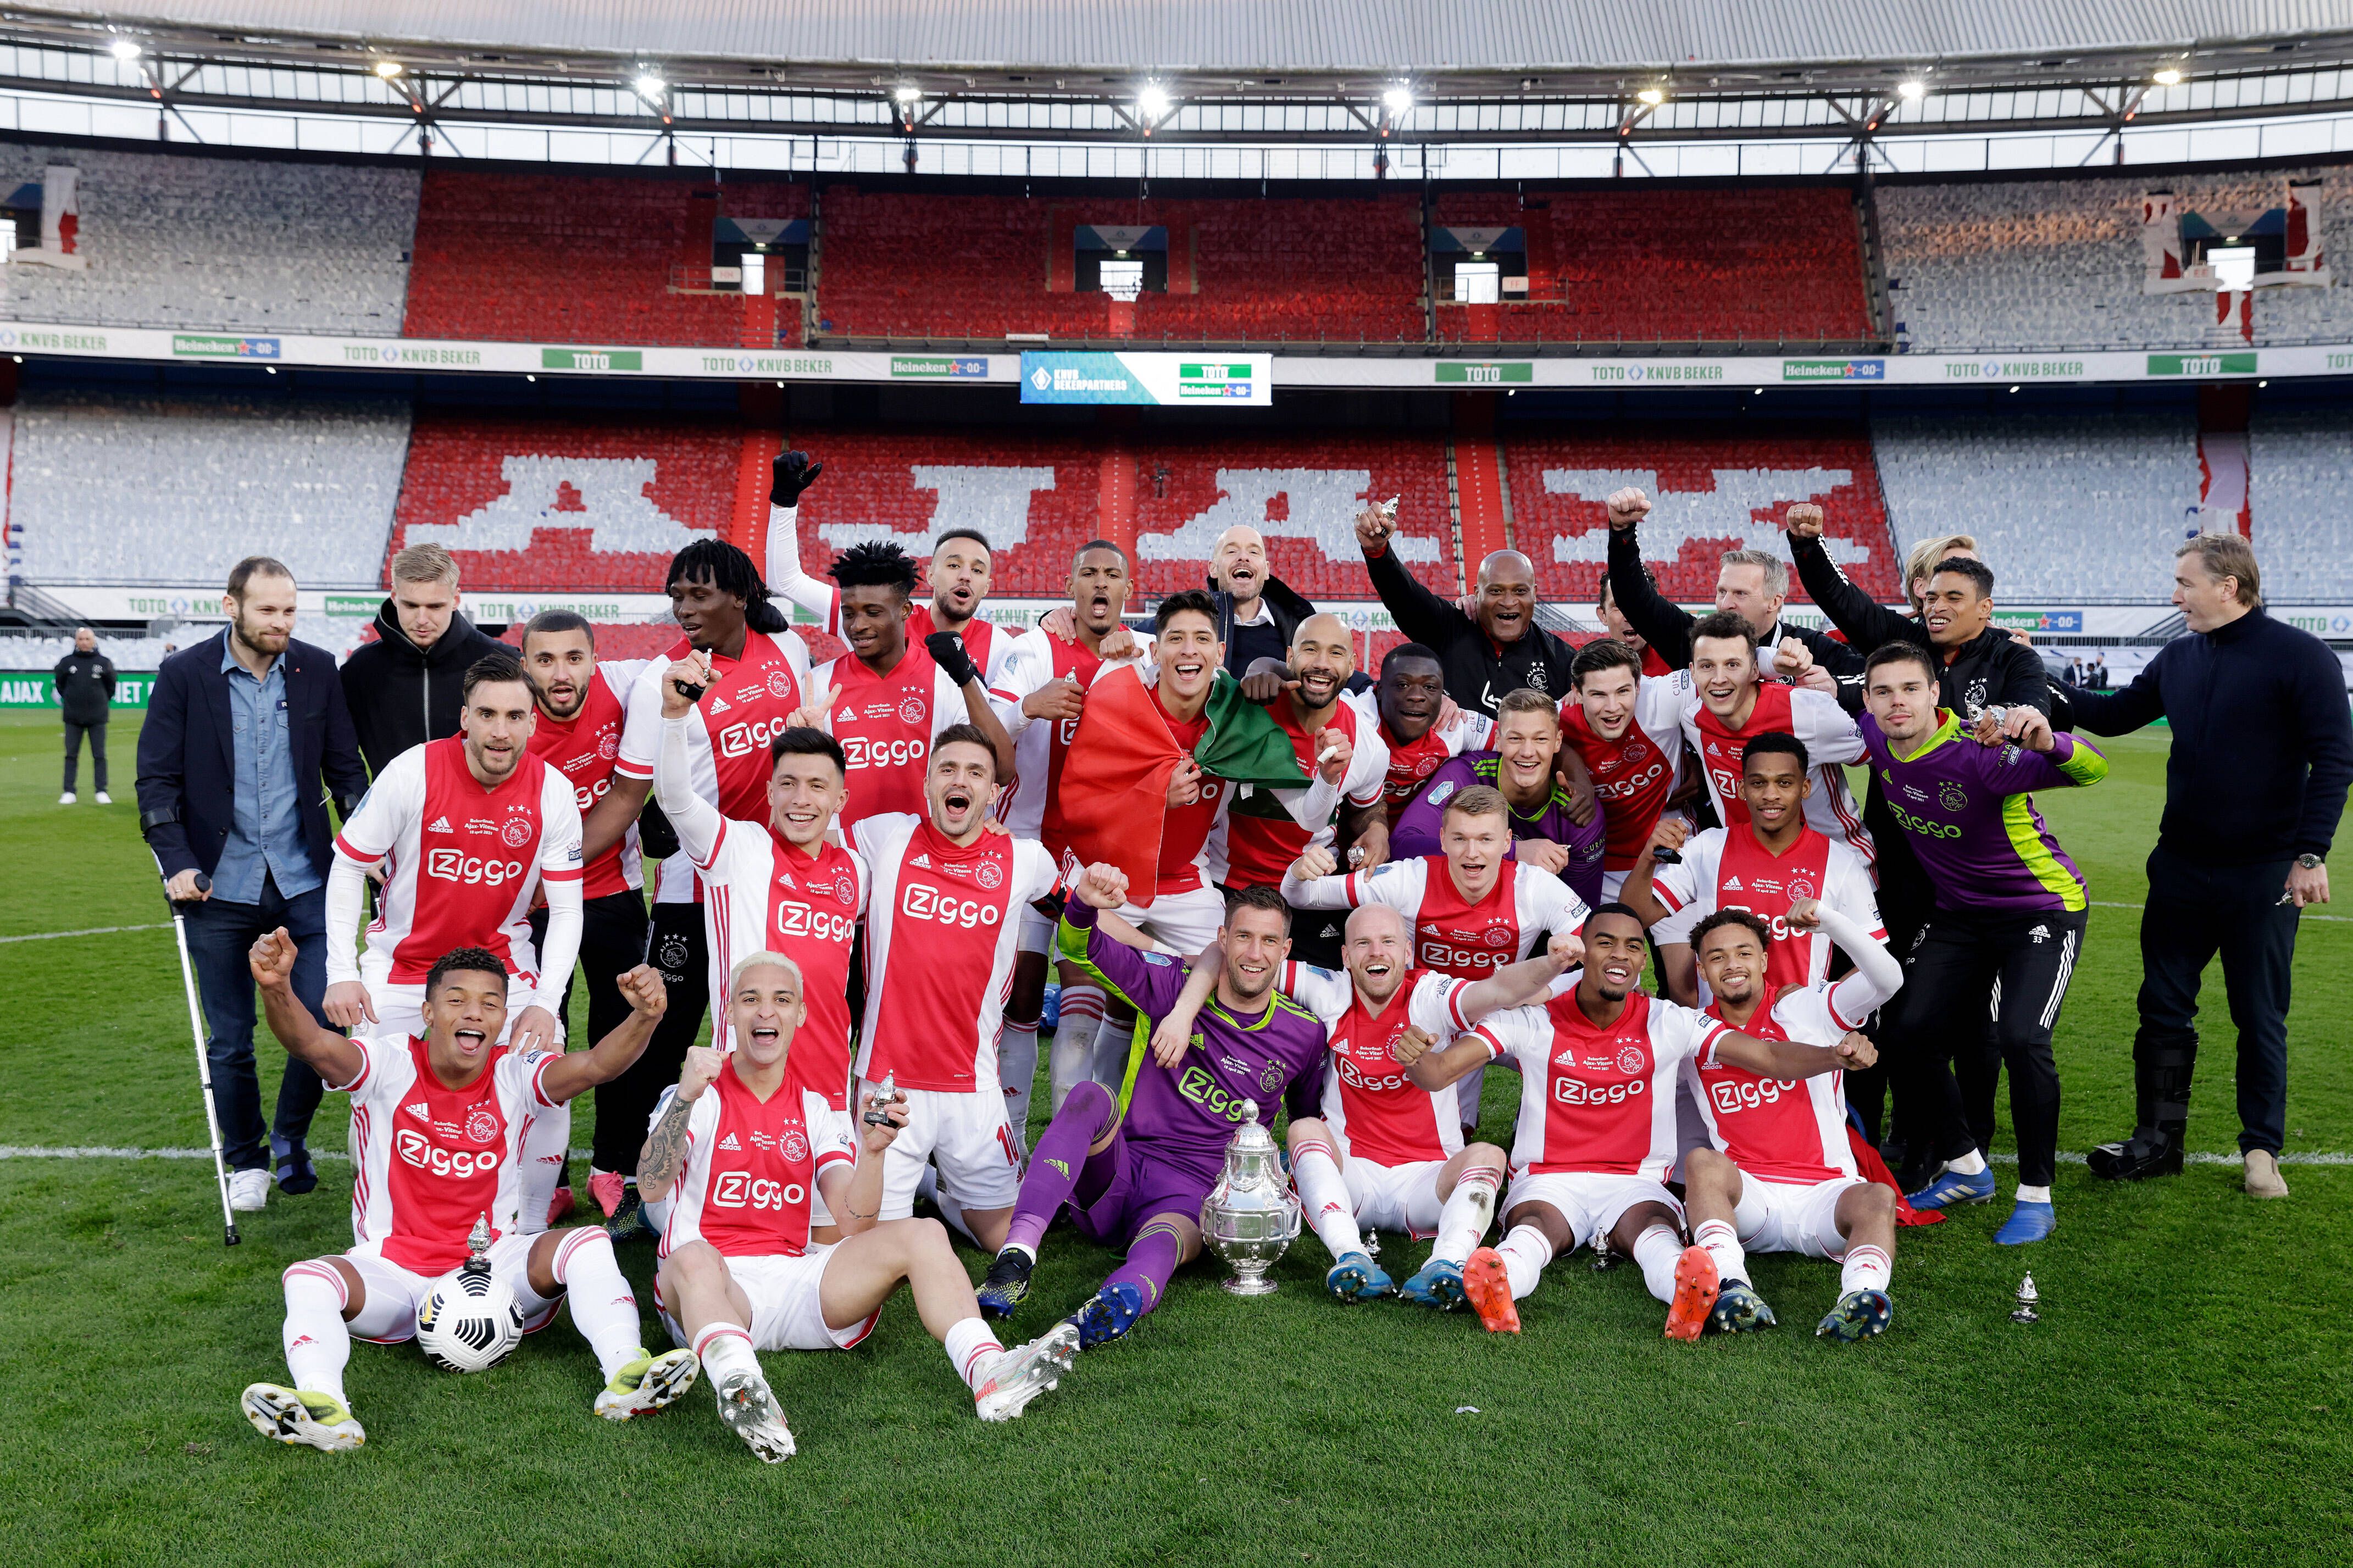 Ajax win 20th KNVB Cup in a 2-1 win over Vitesse - All about Ajax